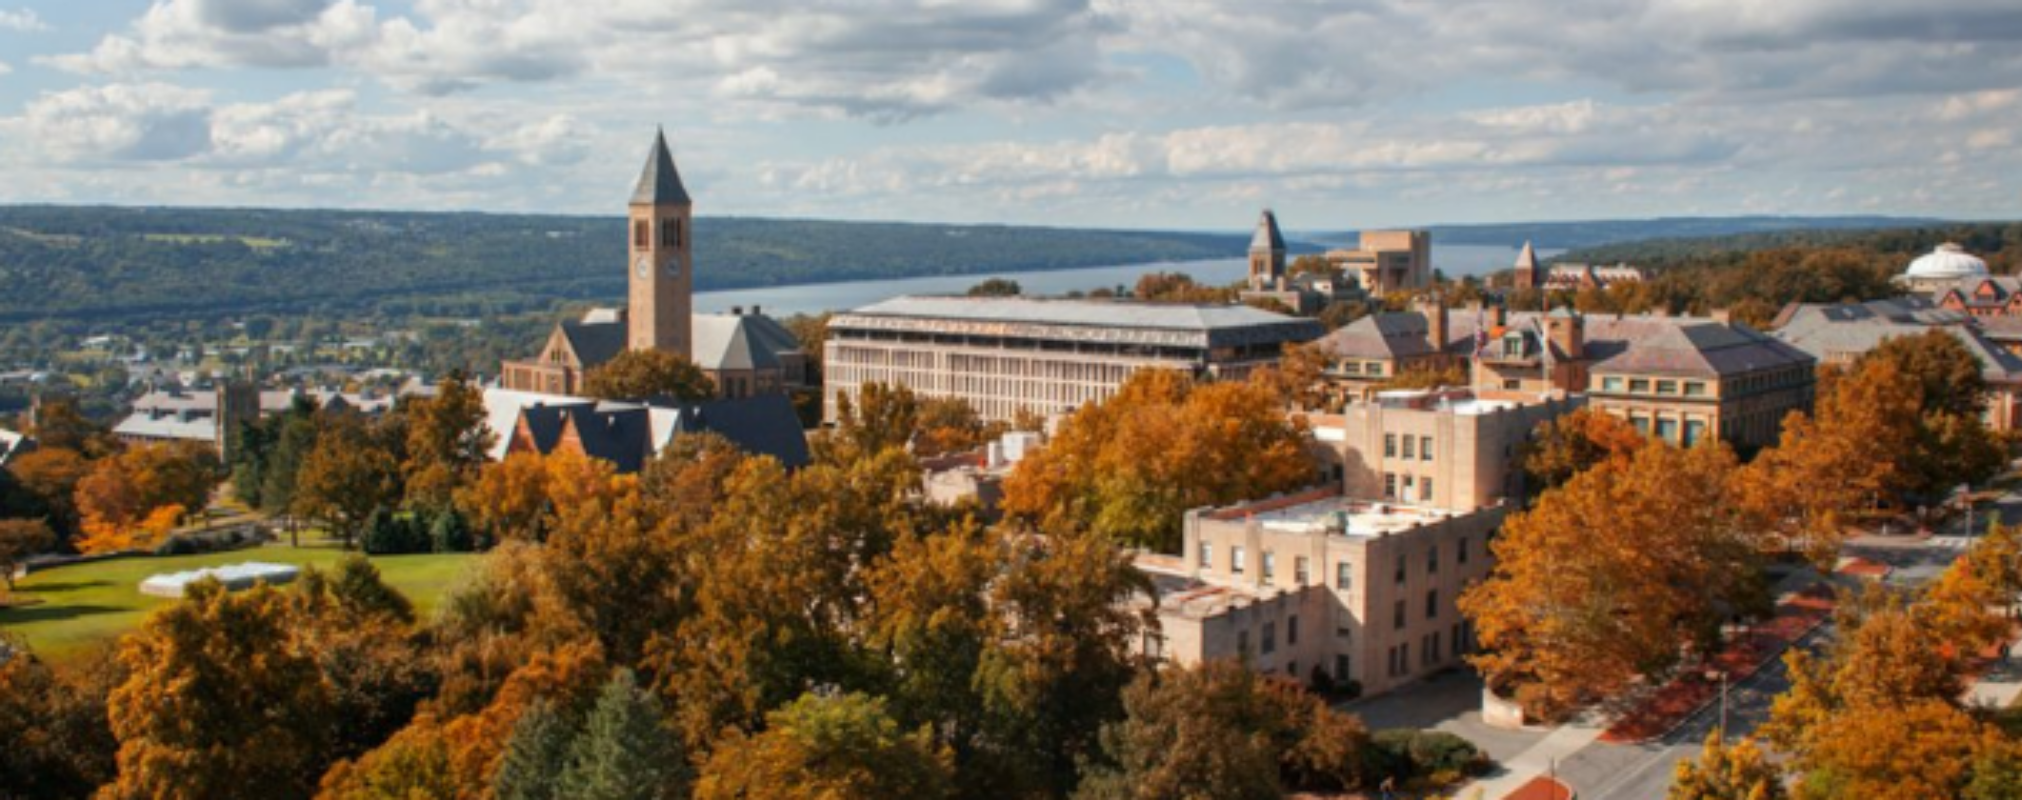 Cornell University: Rankings, Notable Alumni, Admission Process, Acceptance Rate, Fees, Majors, Courses and everything you need to know